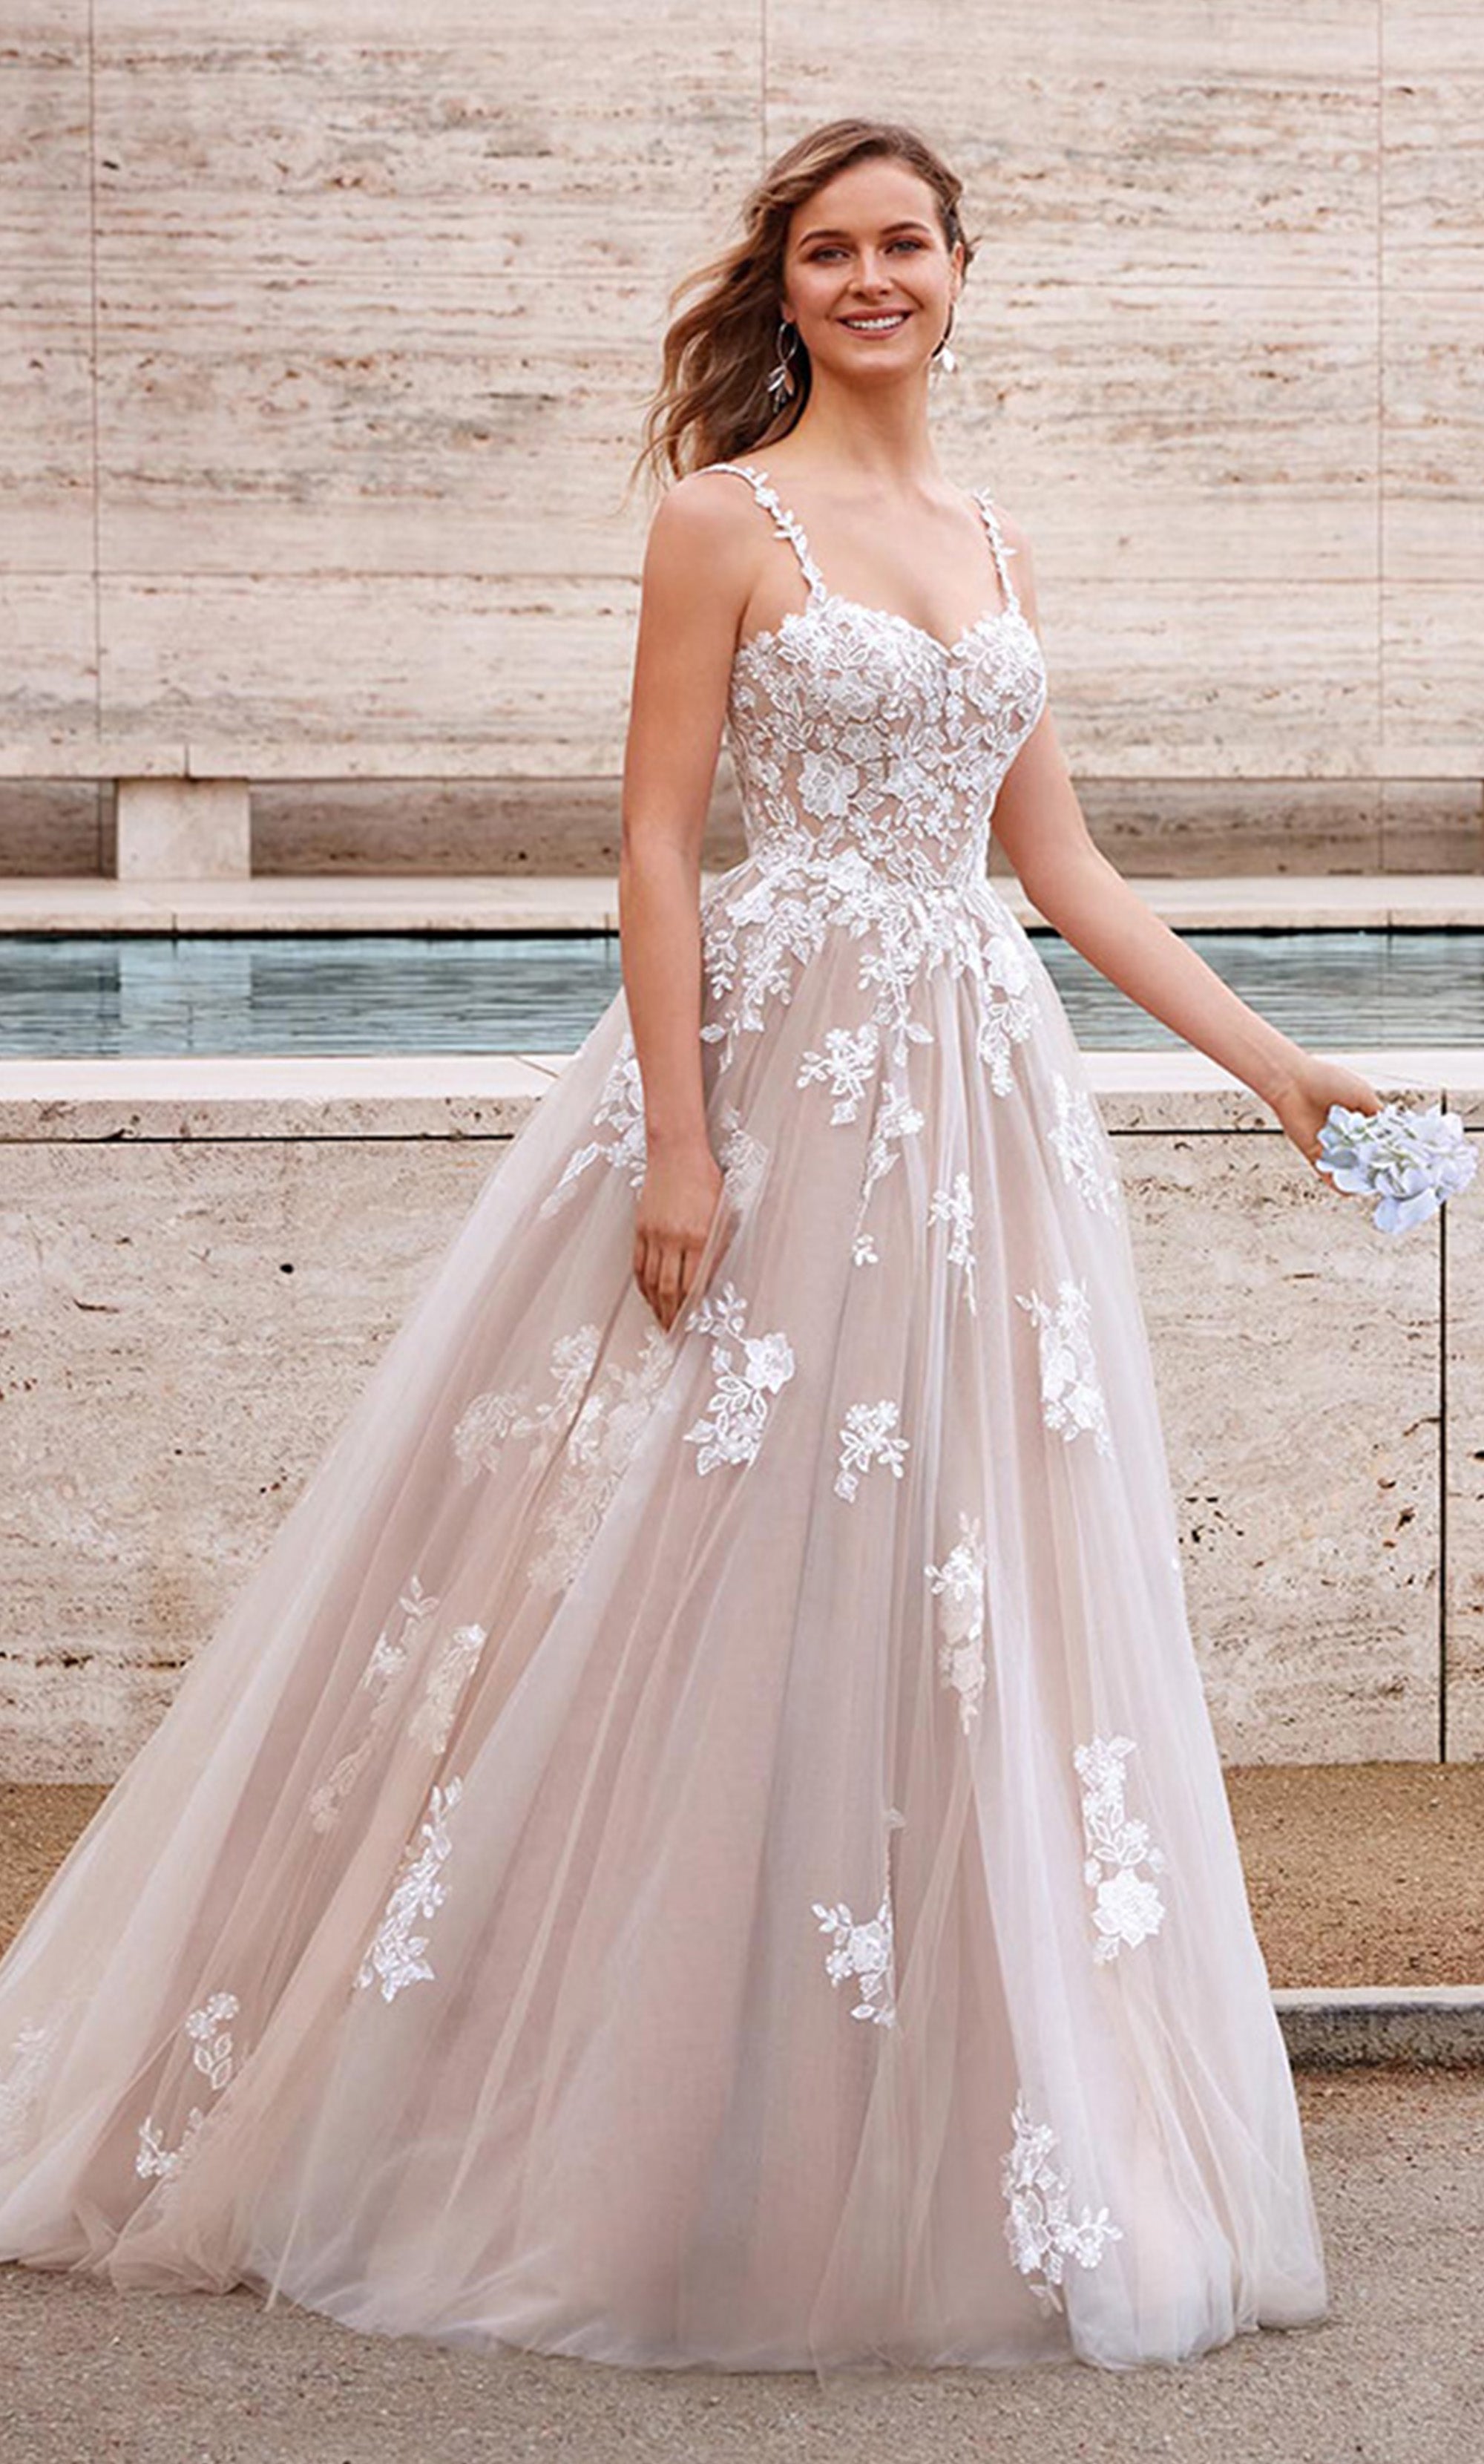 Formal Dress: 7043. Long Bridal Gown, Sweetheart Neckline, Ball Gown